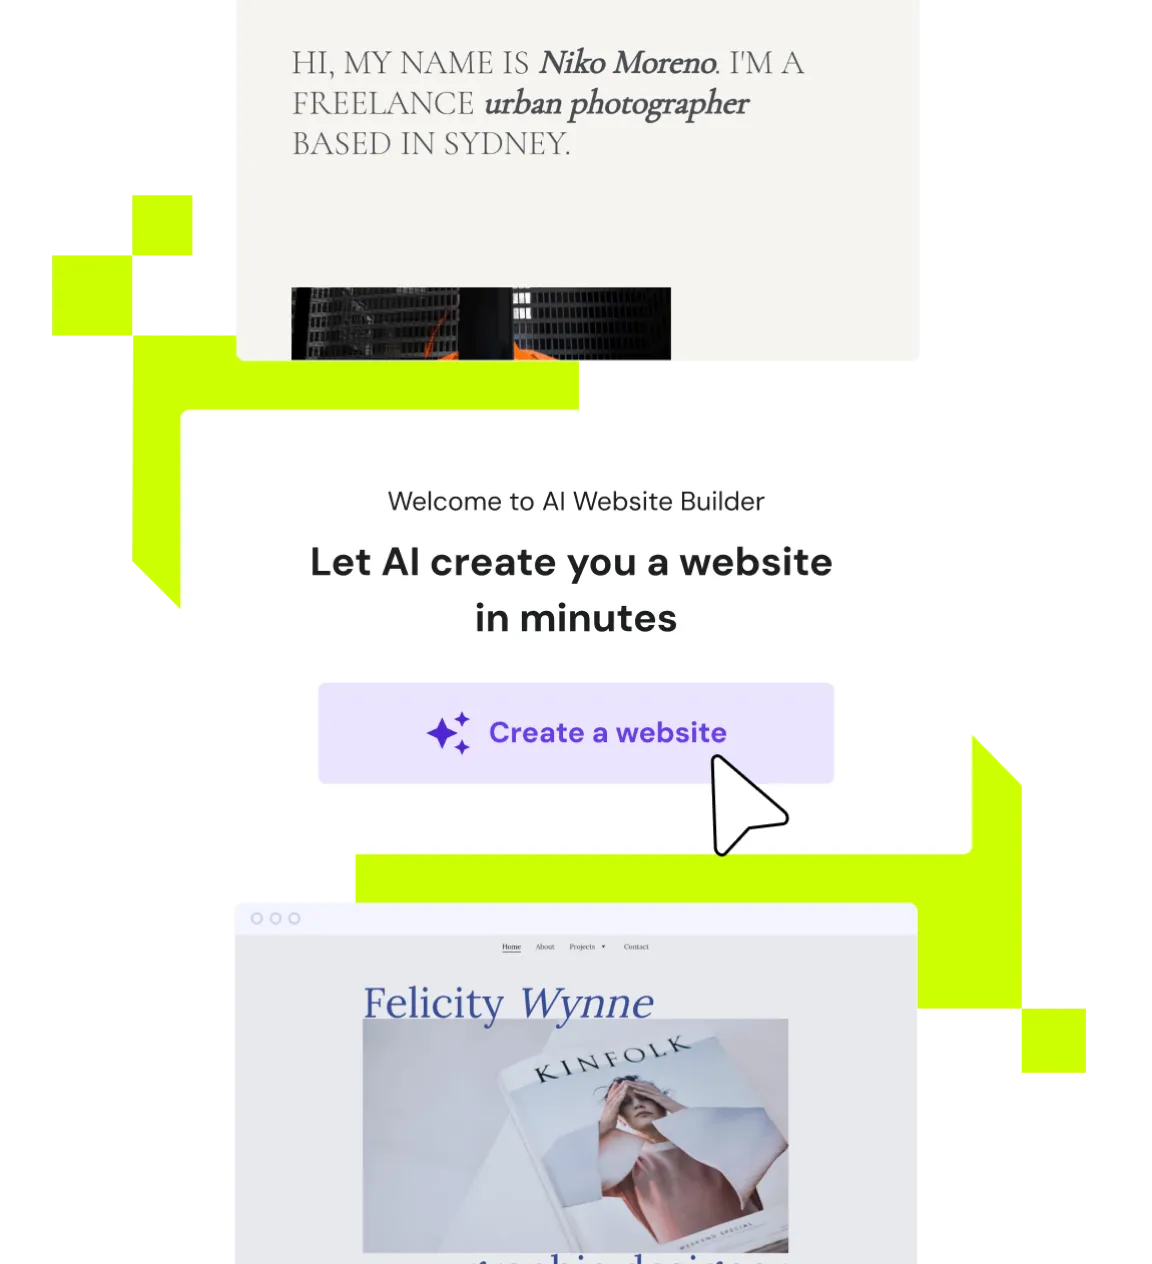 Create a website in 3 easy steps